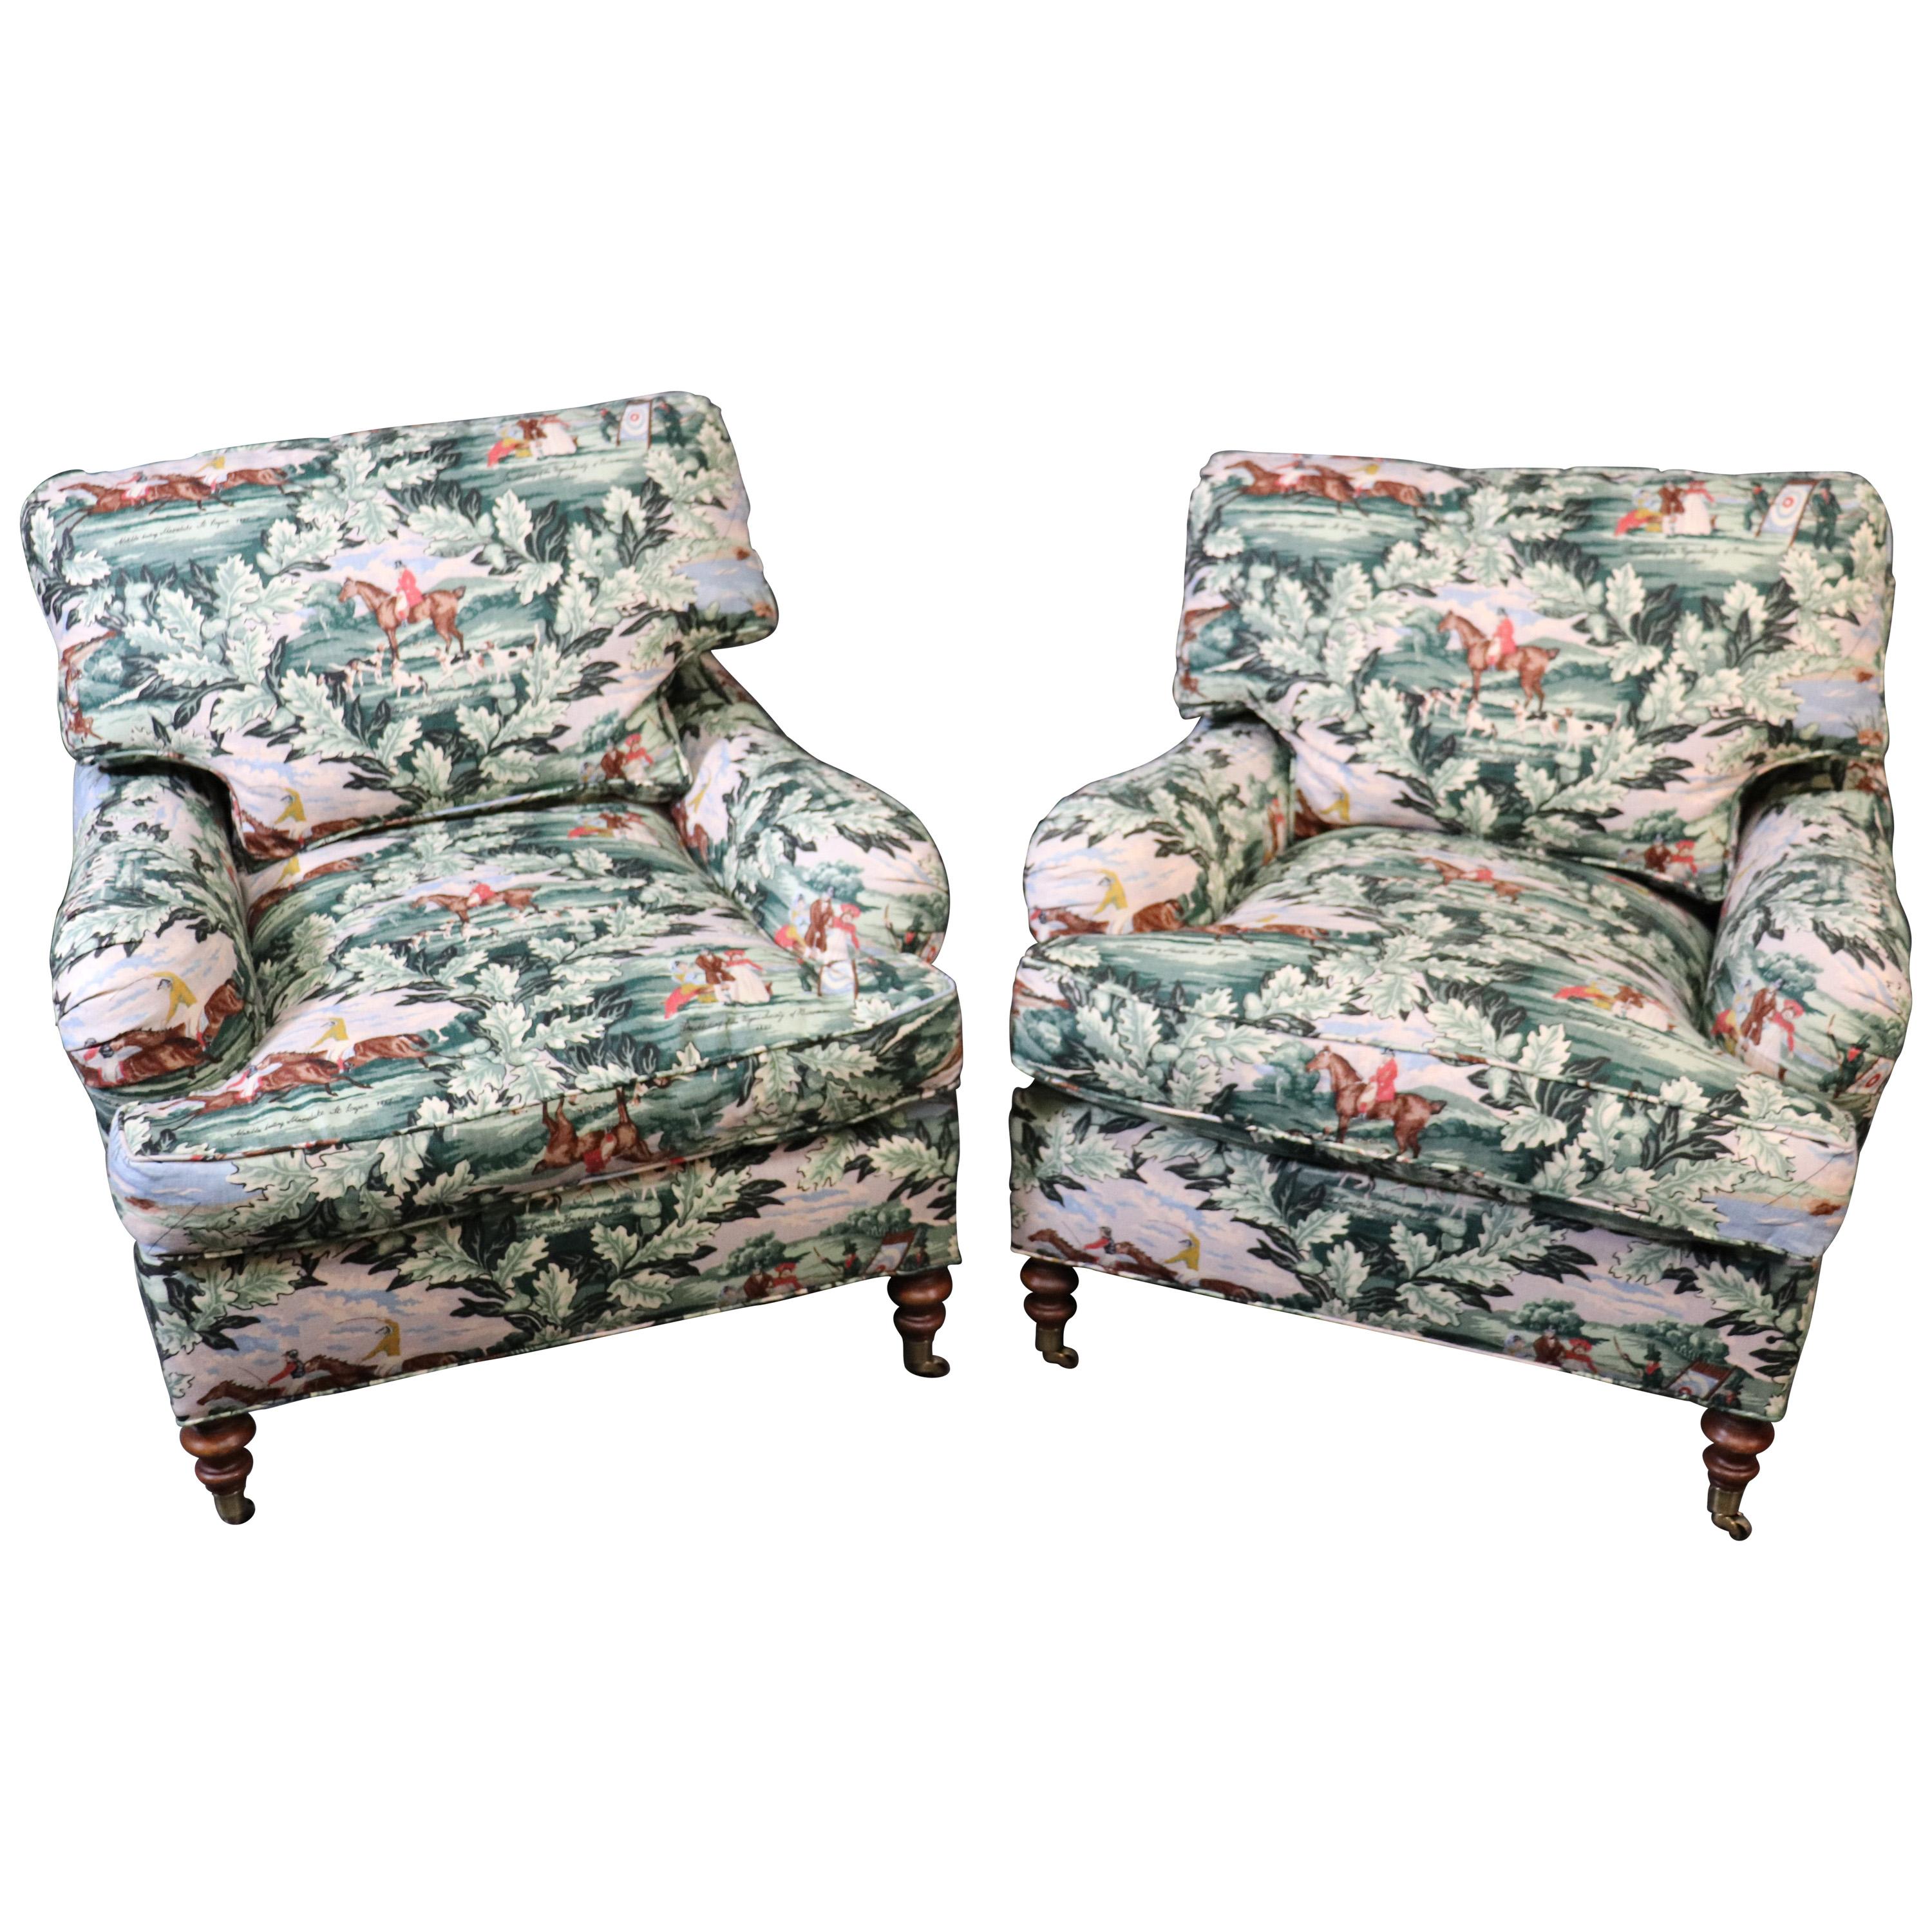 Pair of Edward Ferrell Polo Players Edwardian Upholstered Club Chairs